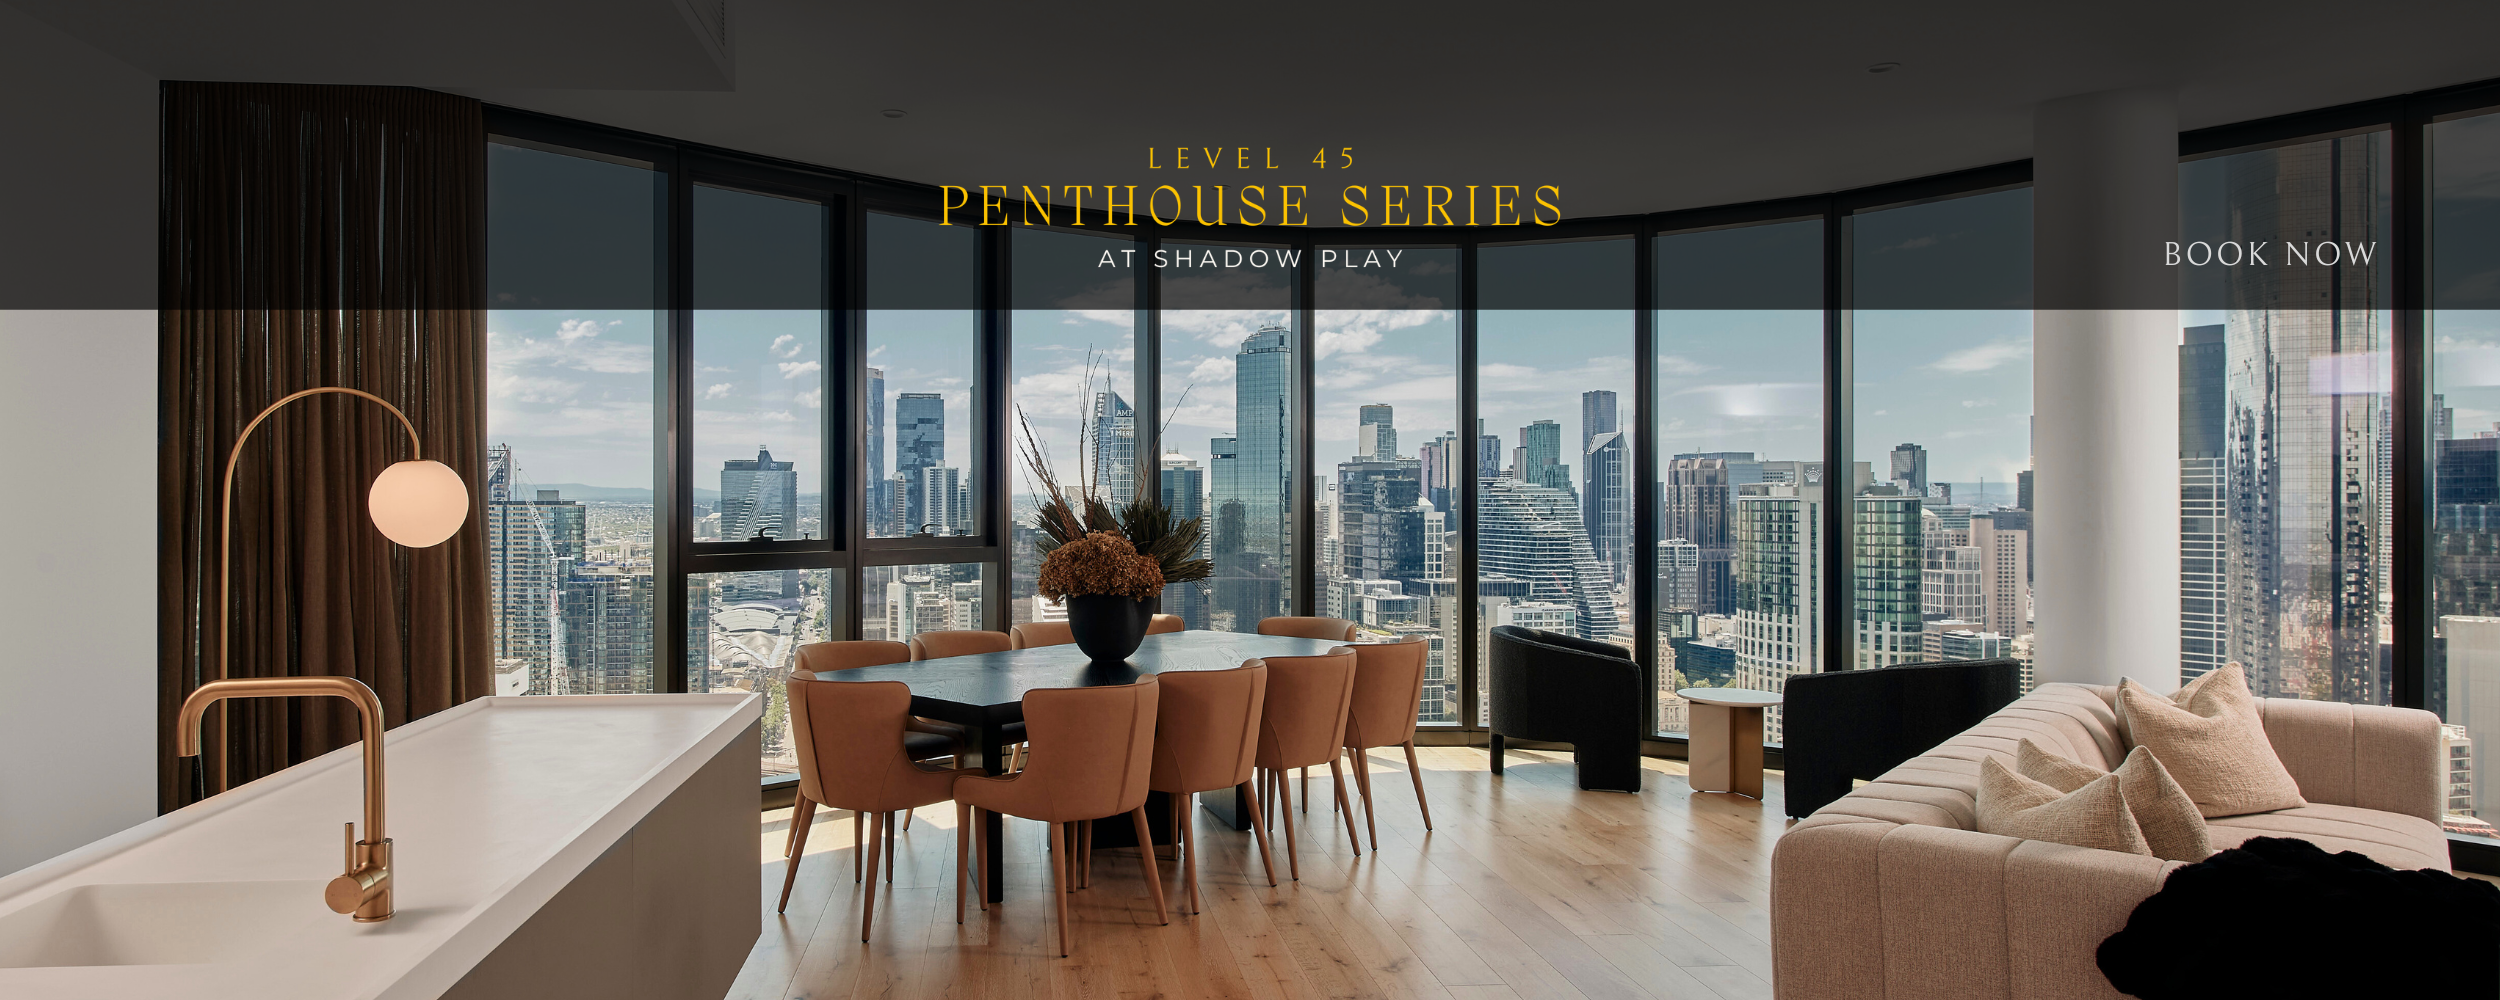 Penthouse banner.png